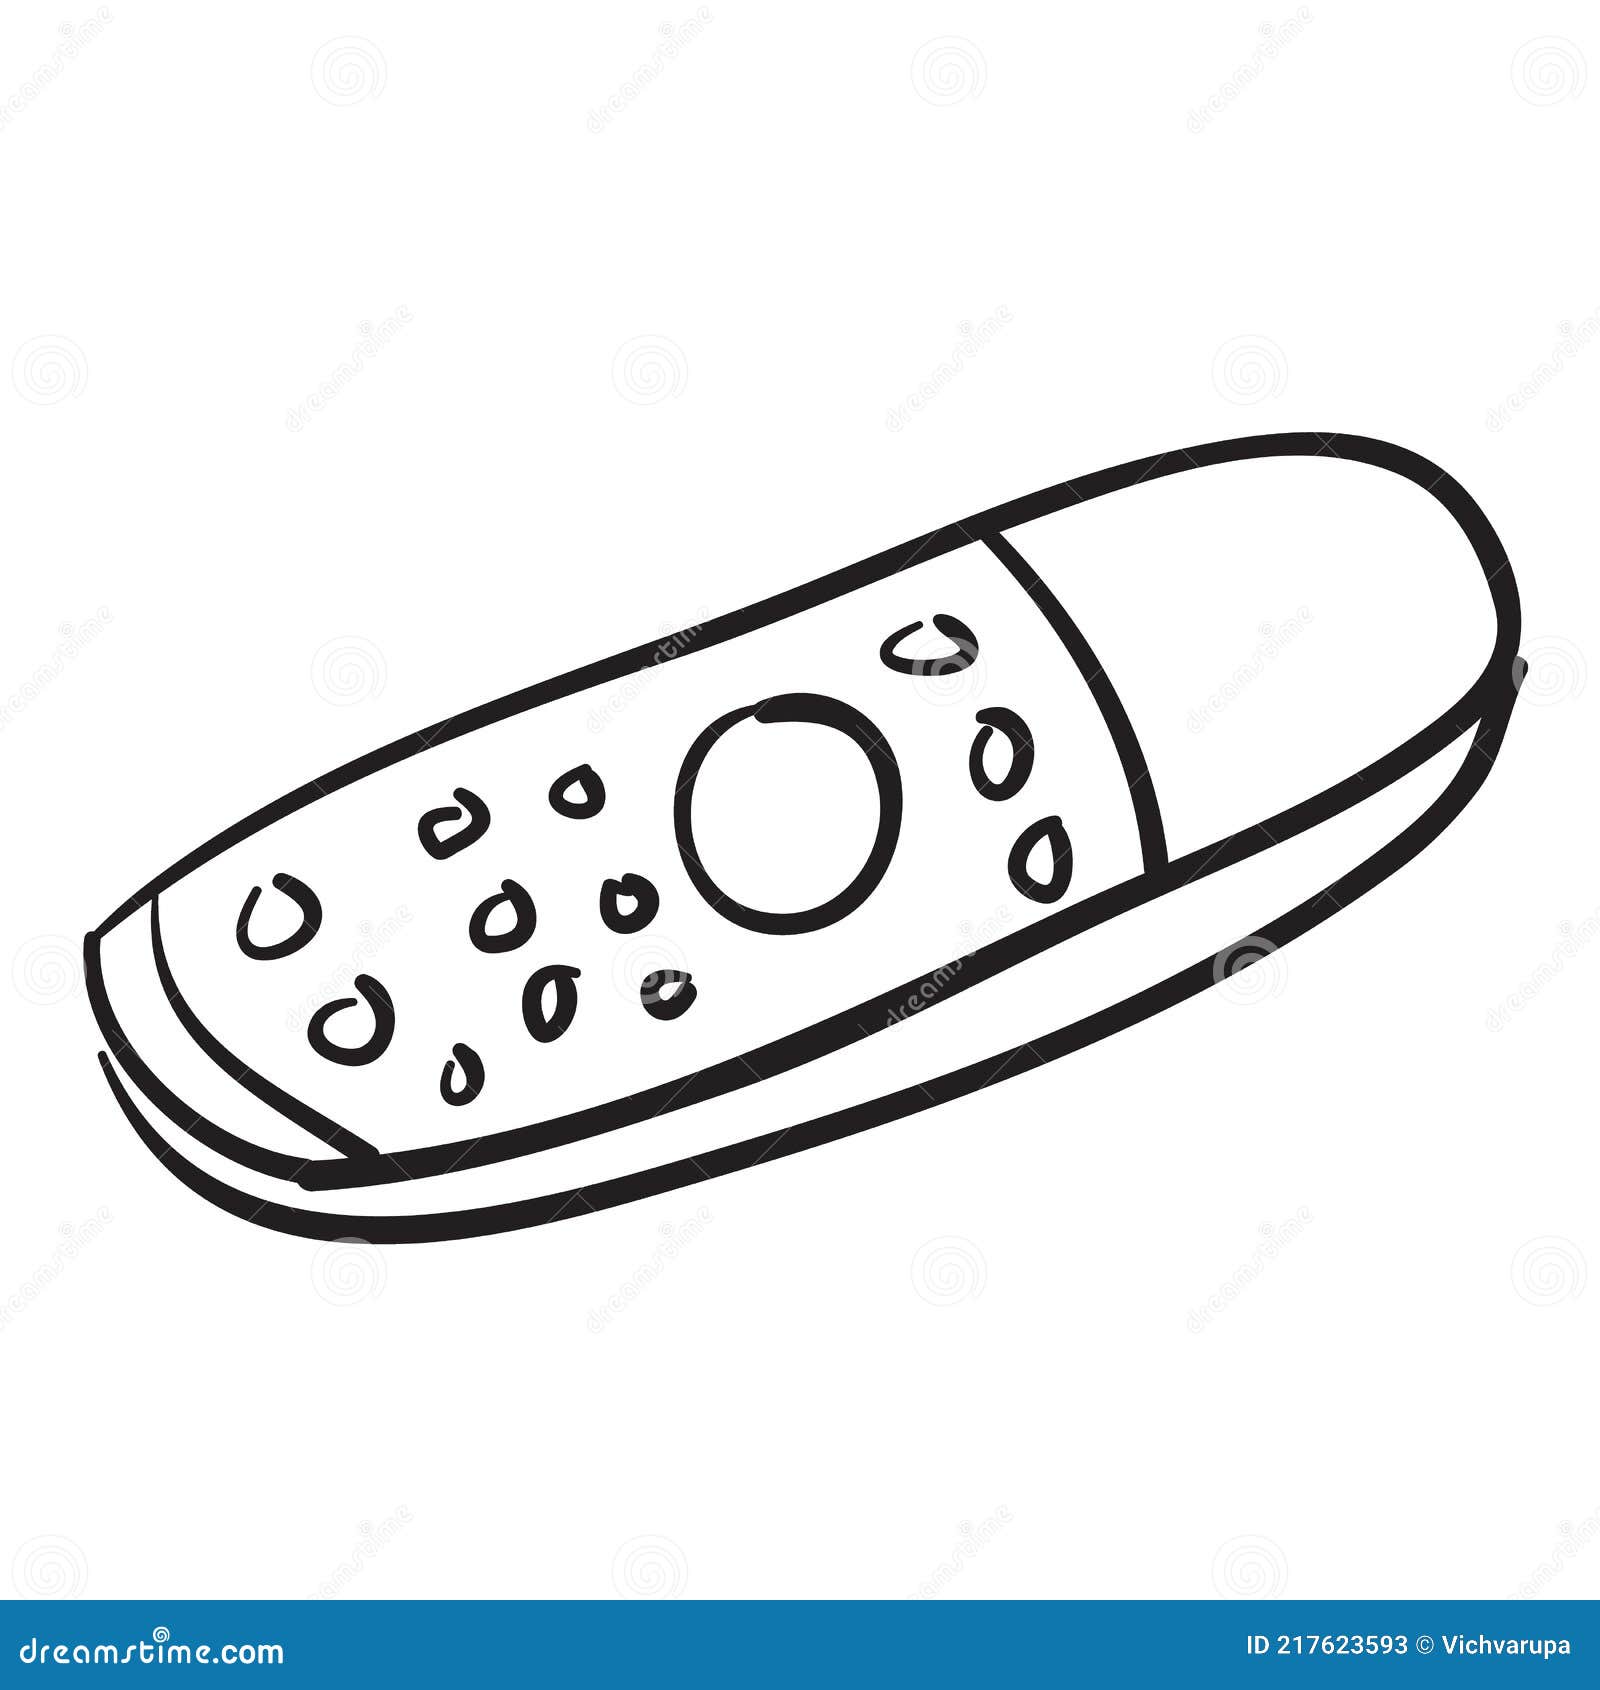 How to Draw a TV Remote  YouTube